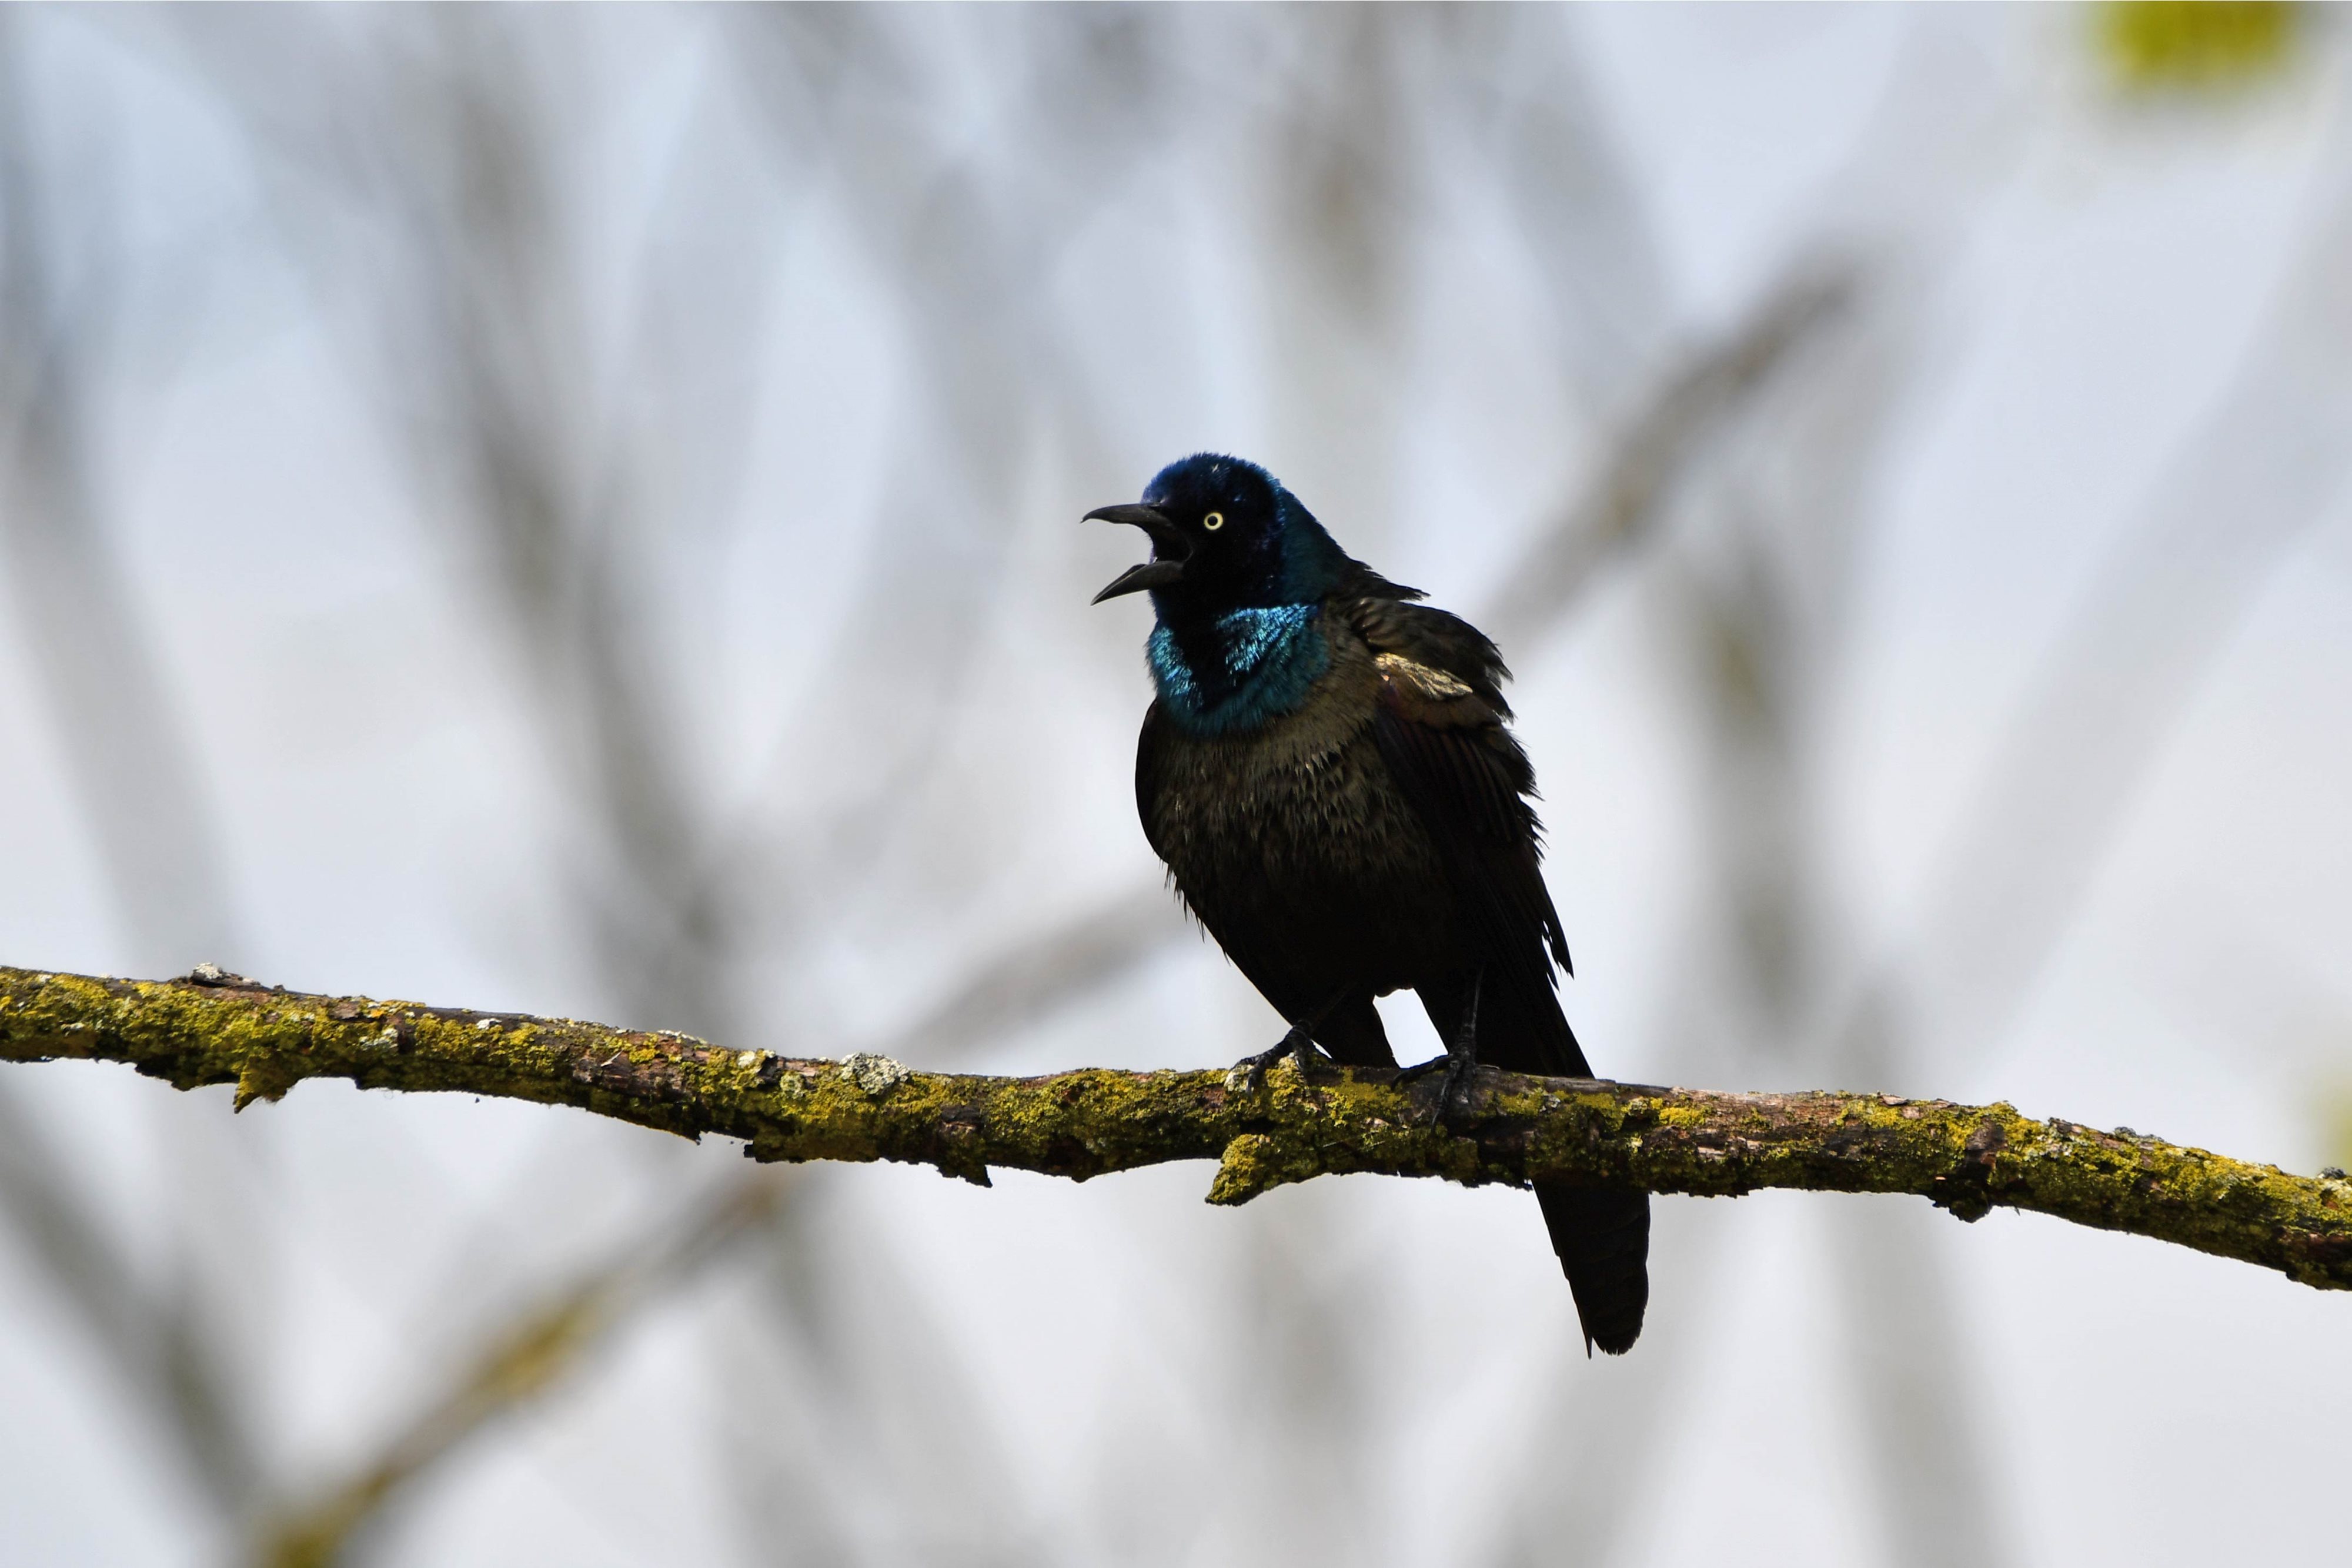 A common grackle with its mouth open.